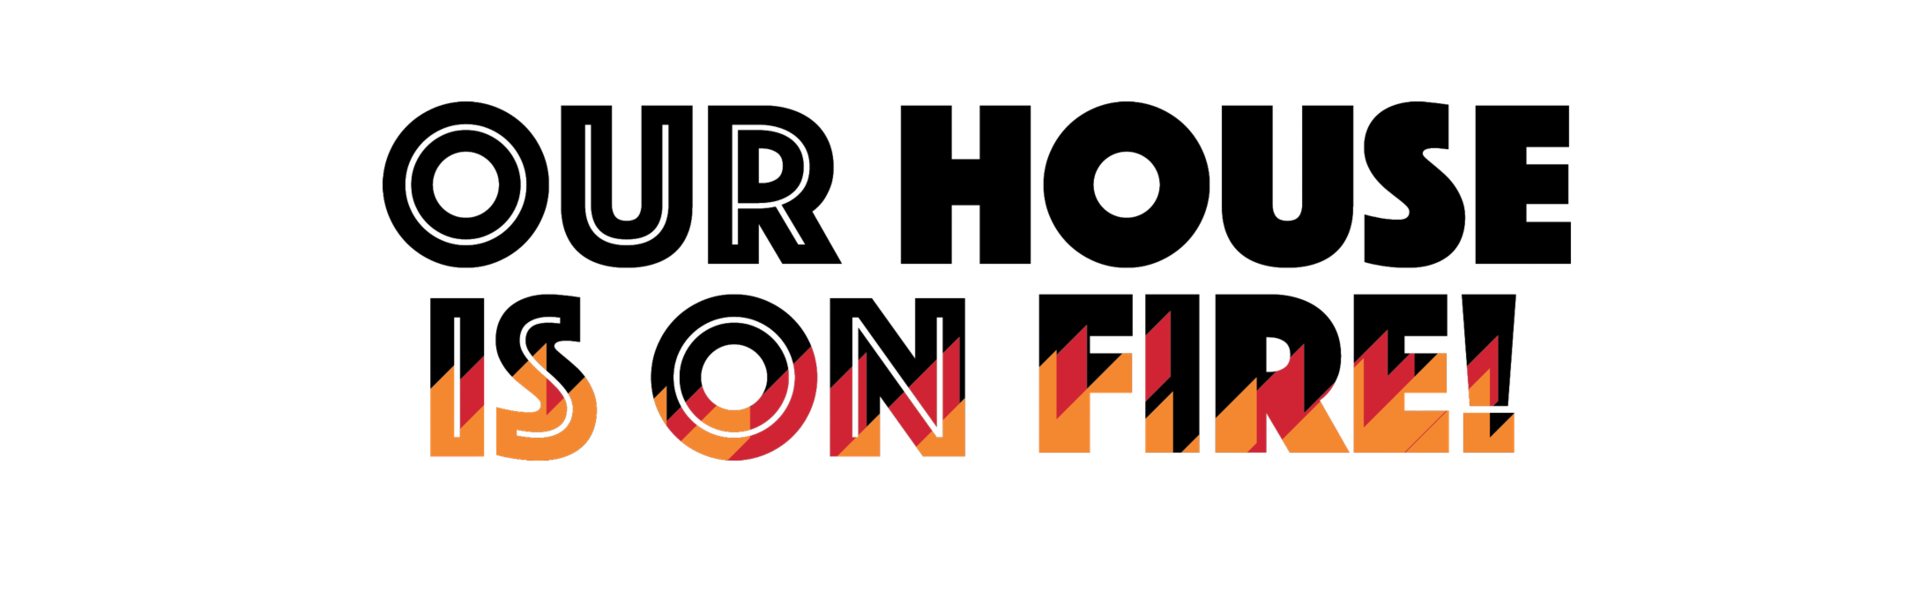 OUR HOUSE IS ON FIRE! image